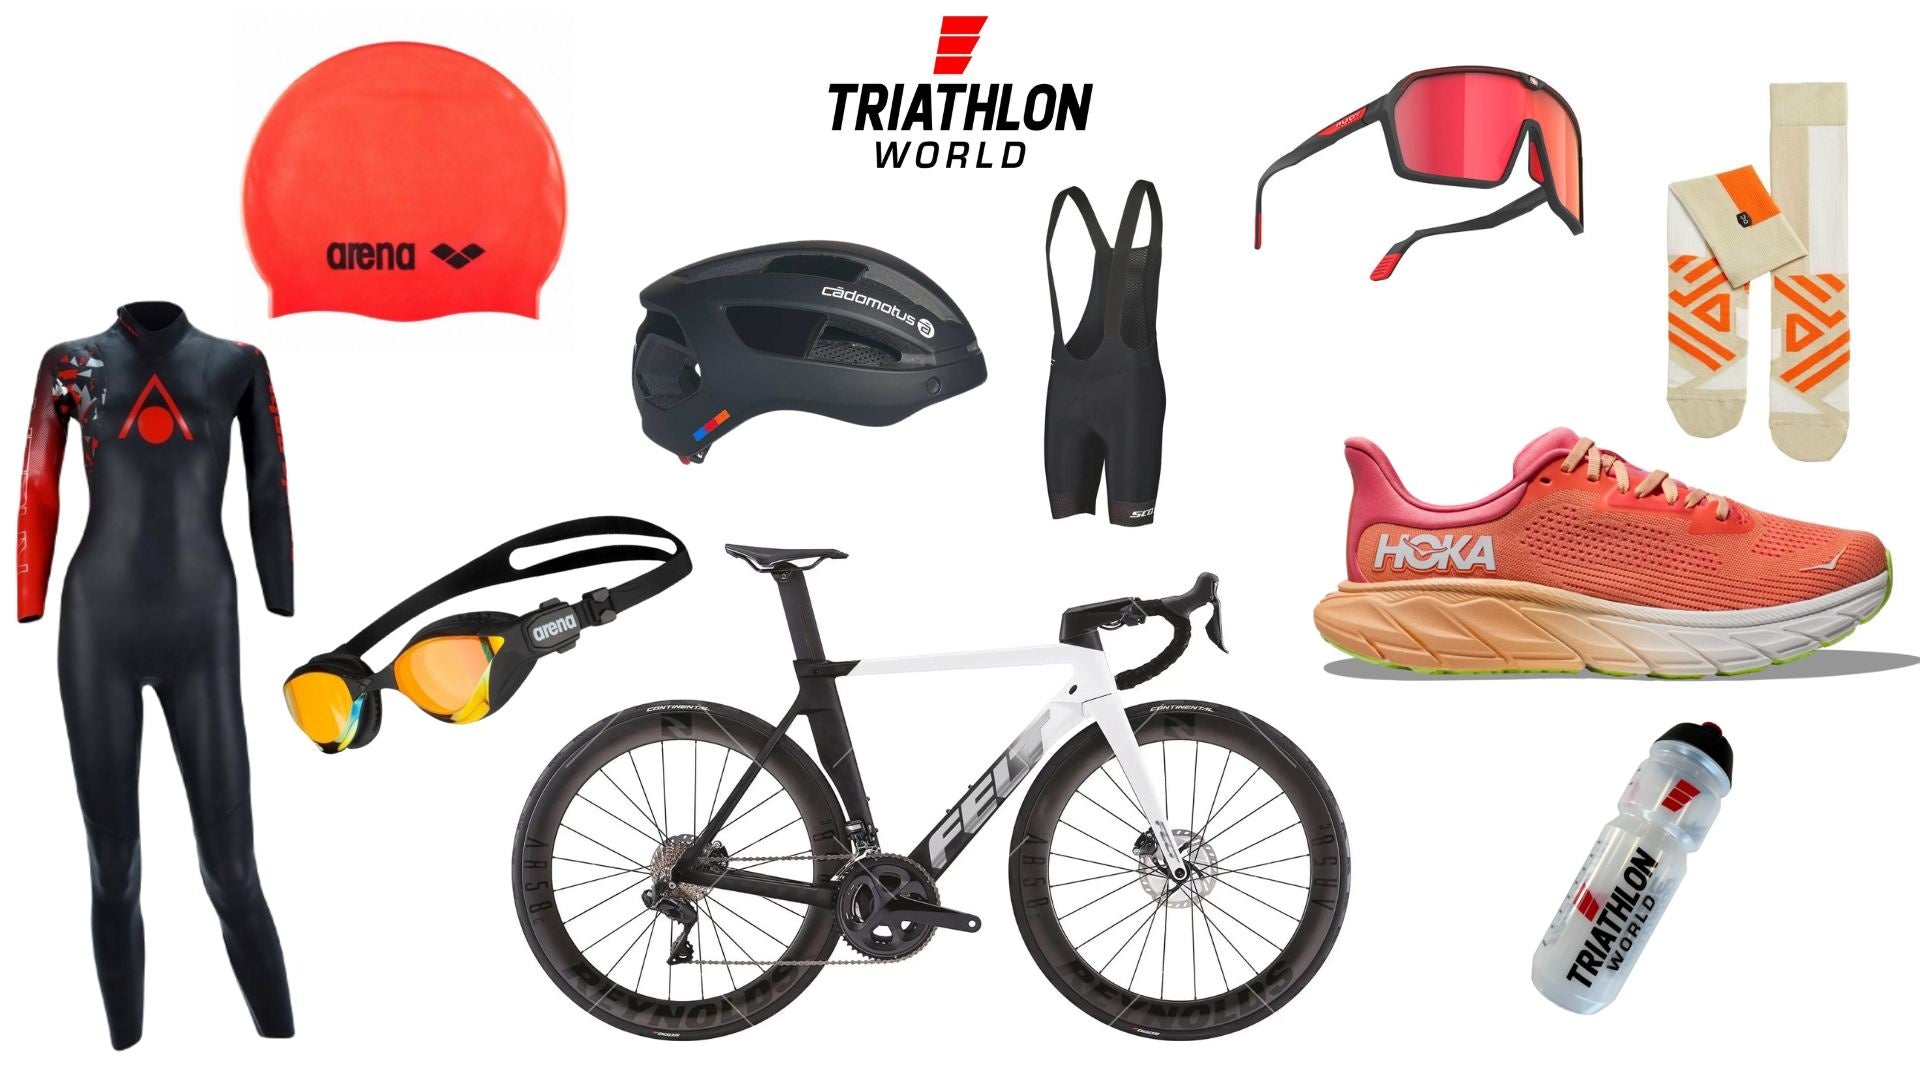 You need these things for your first triathlon!